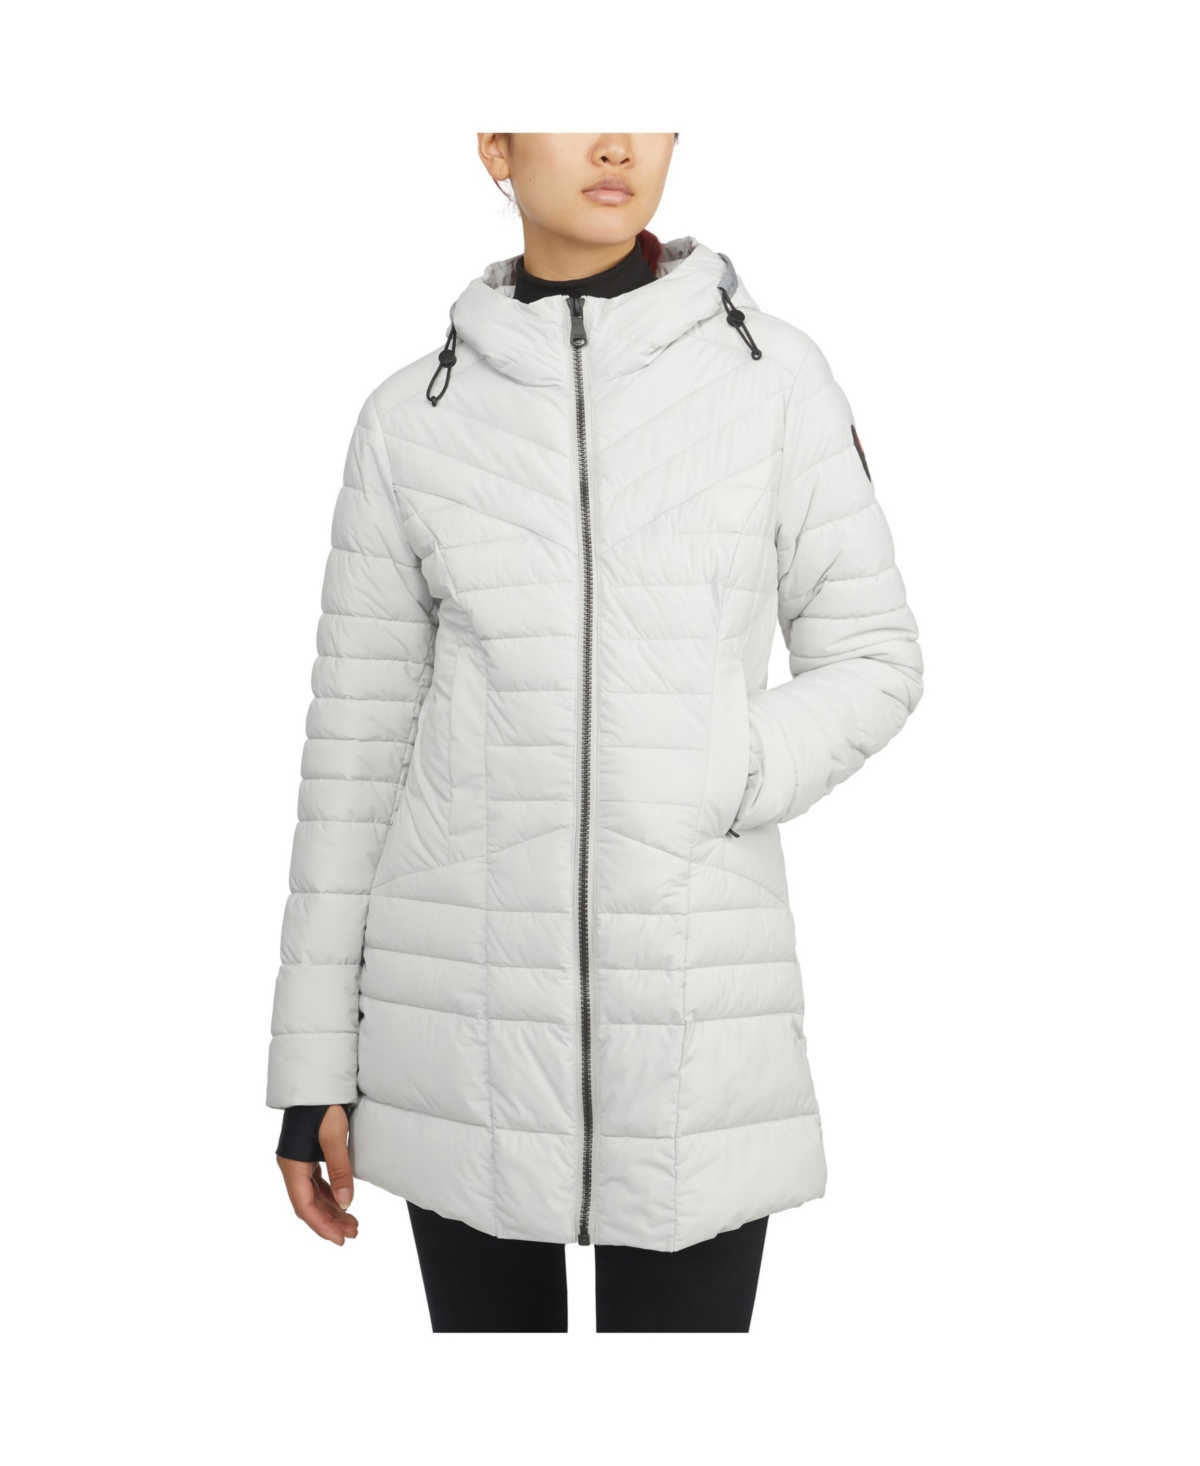 Women's Cort Fixed Hood Puffer Jacket with Reflective Trim - Silver